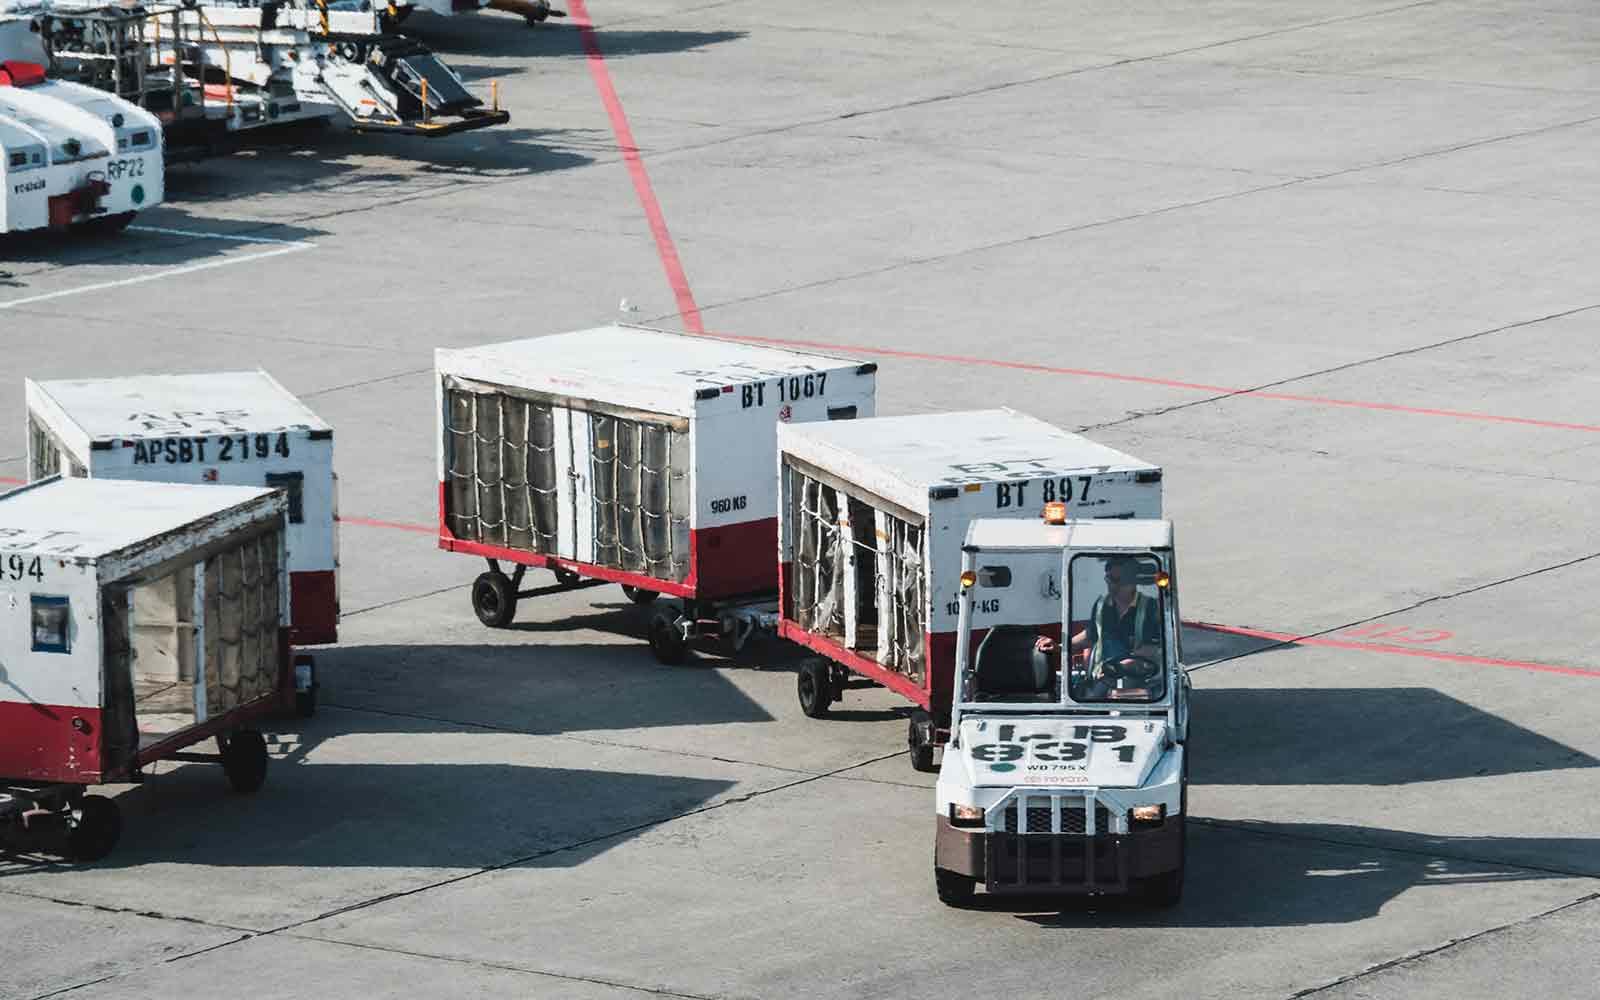 Airport luggage truck